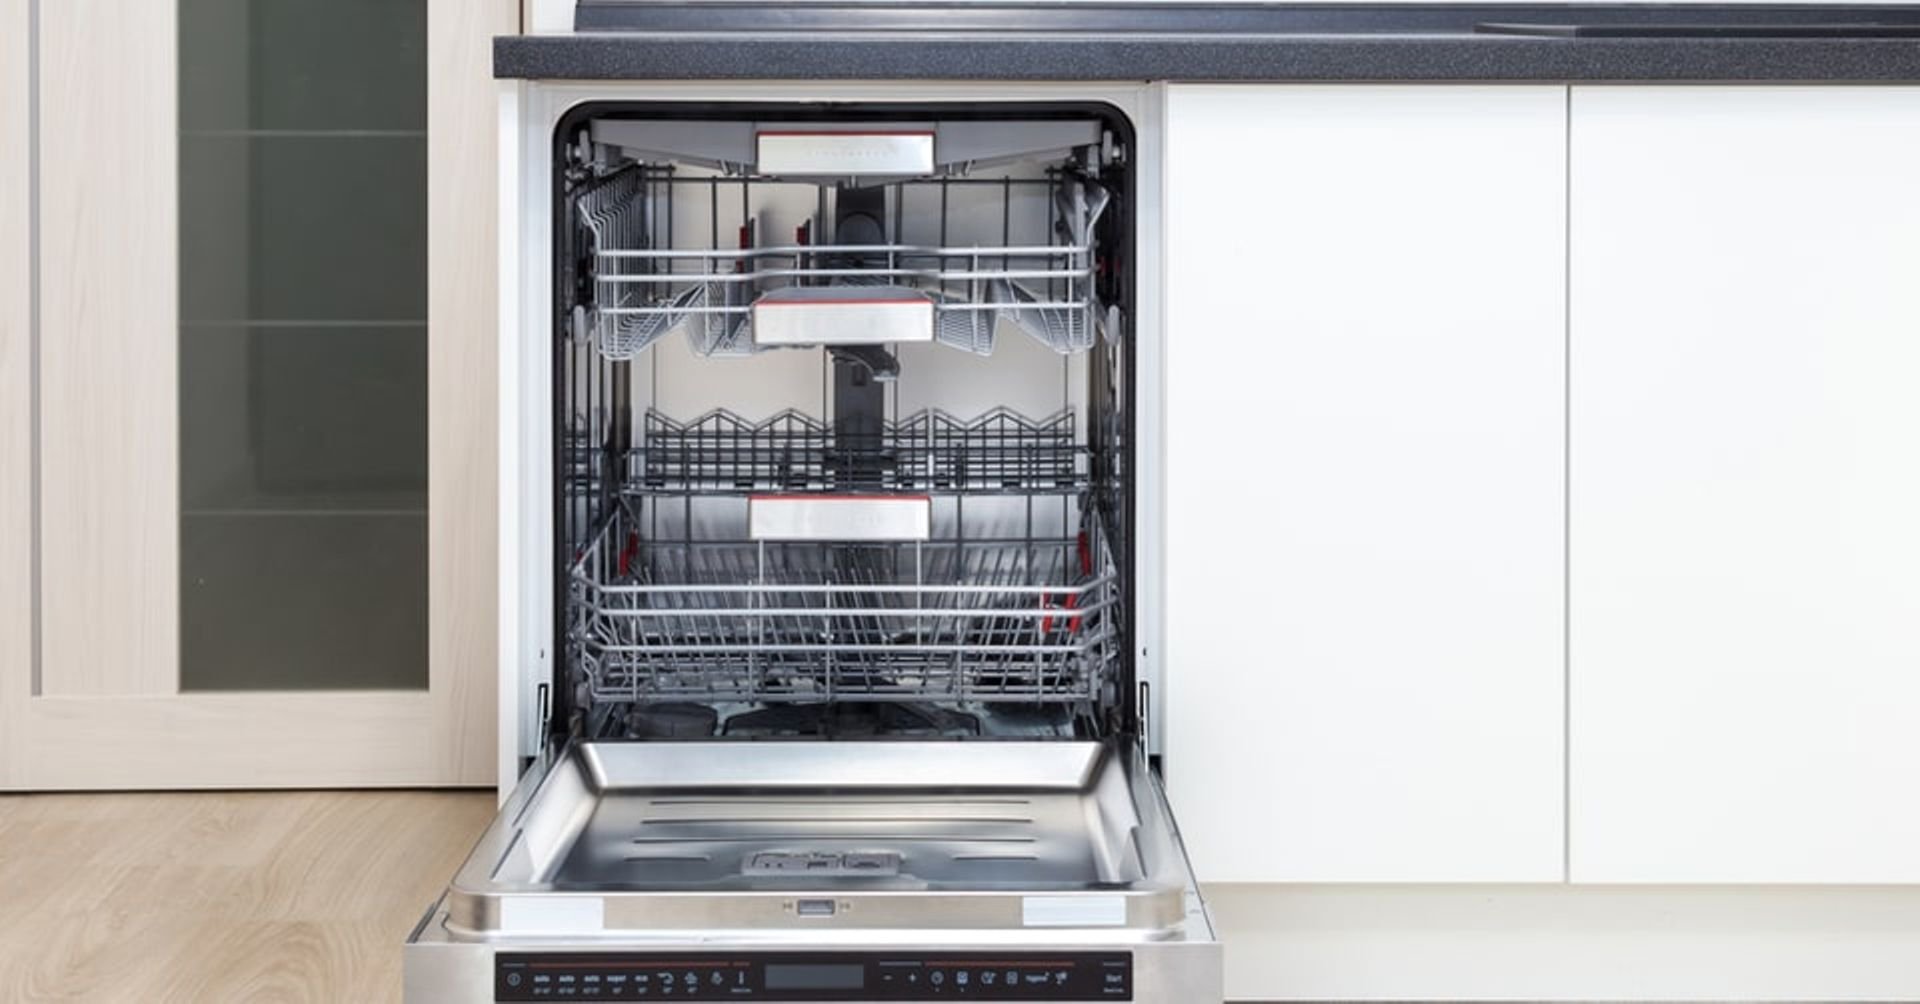 Built-in dishwasher picture